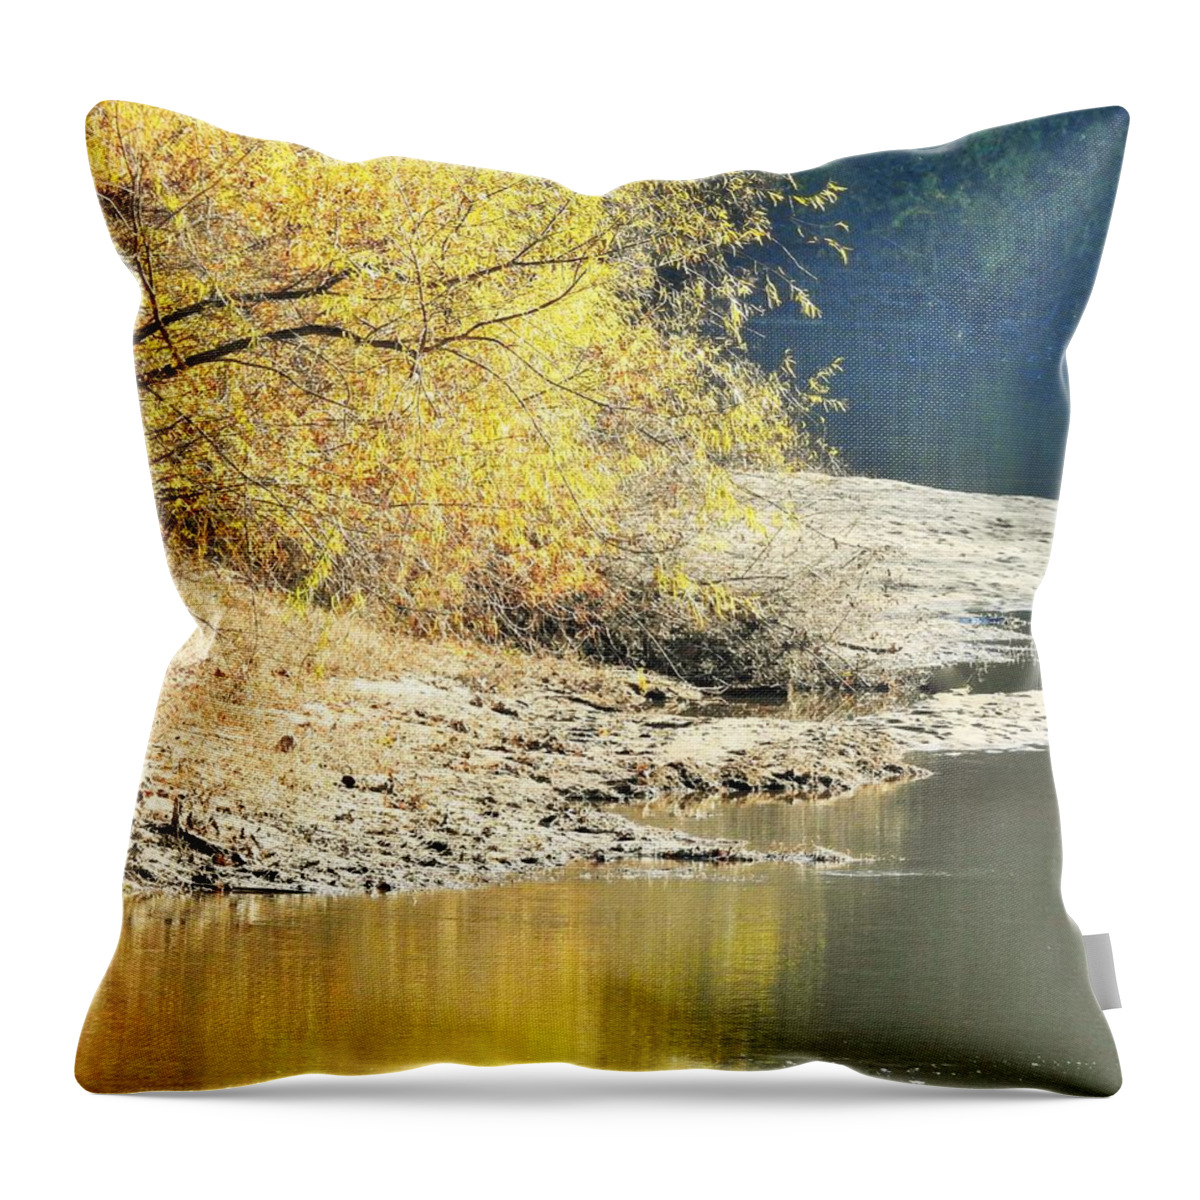 River Throw Pillow featuring the photograph River Tree Of Sun by Jan Gelders